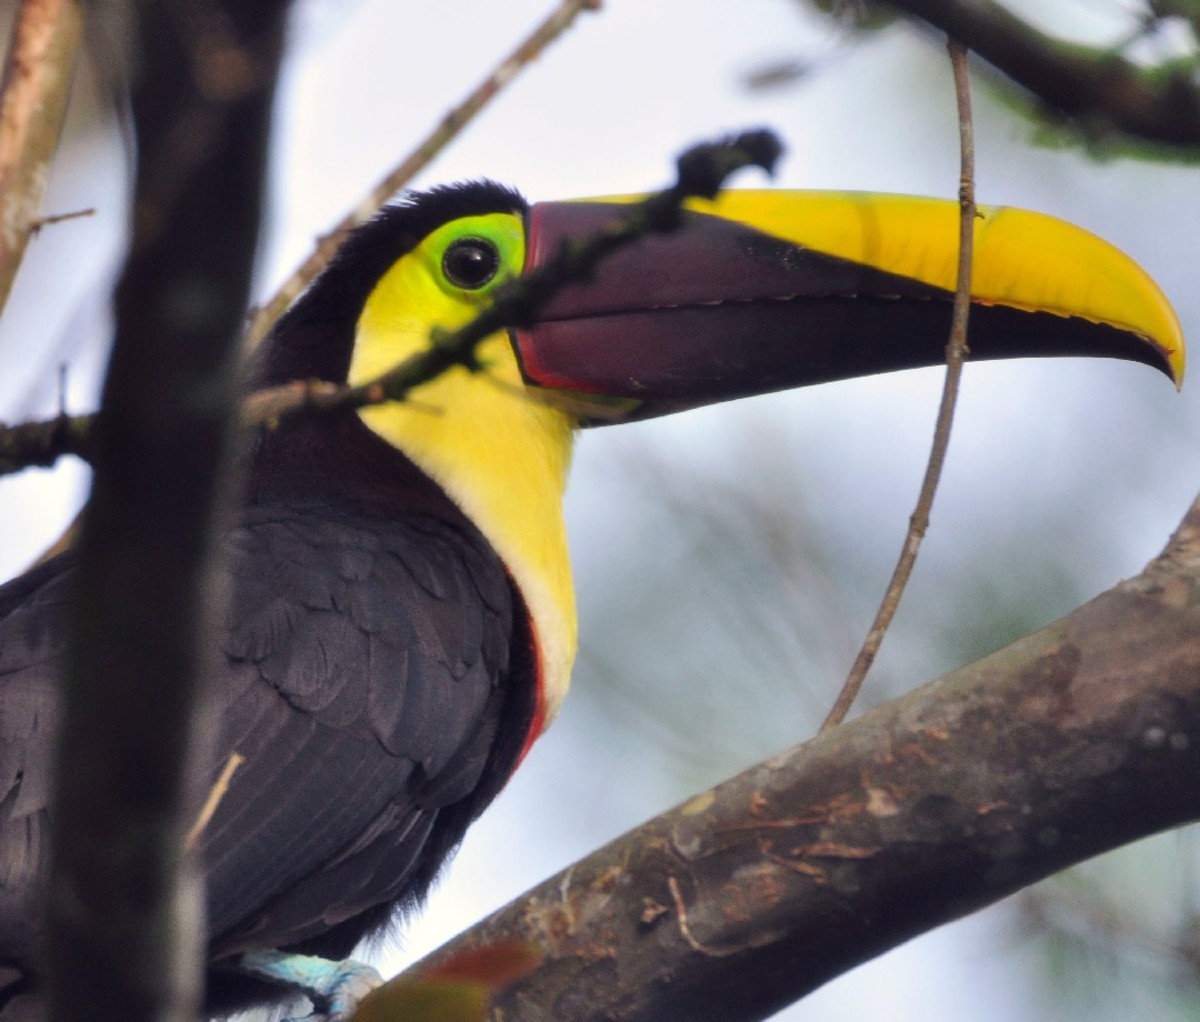 Closeup of an elusive toucanet (toucan-like bird) sitting on a branch in the rainforest of Costa Rica's Manuel Antonio National Park